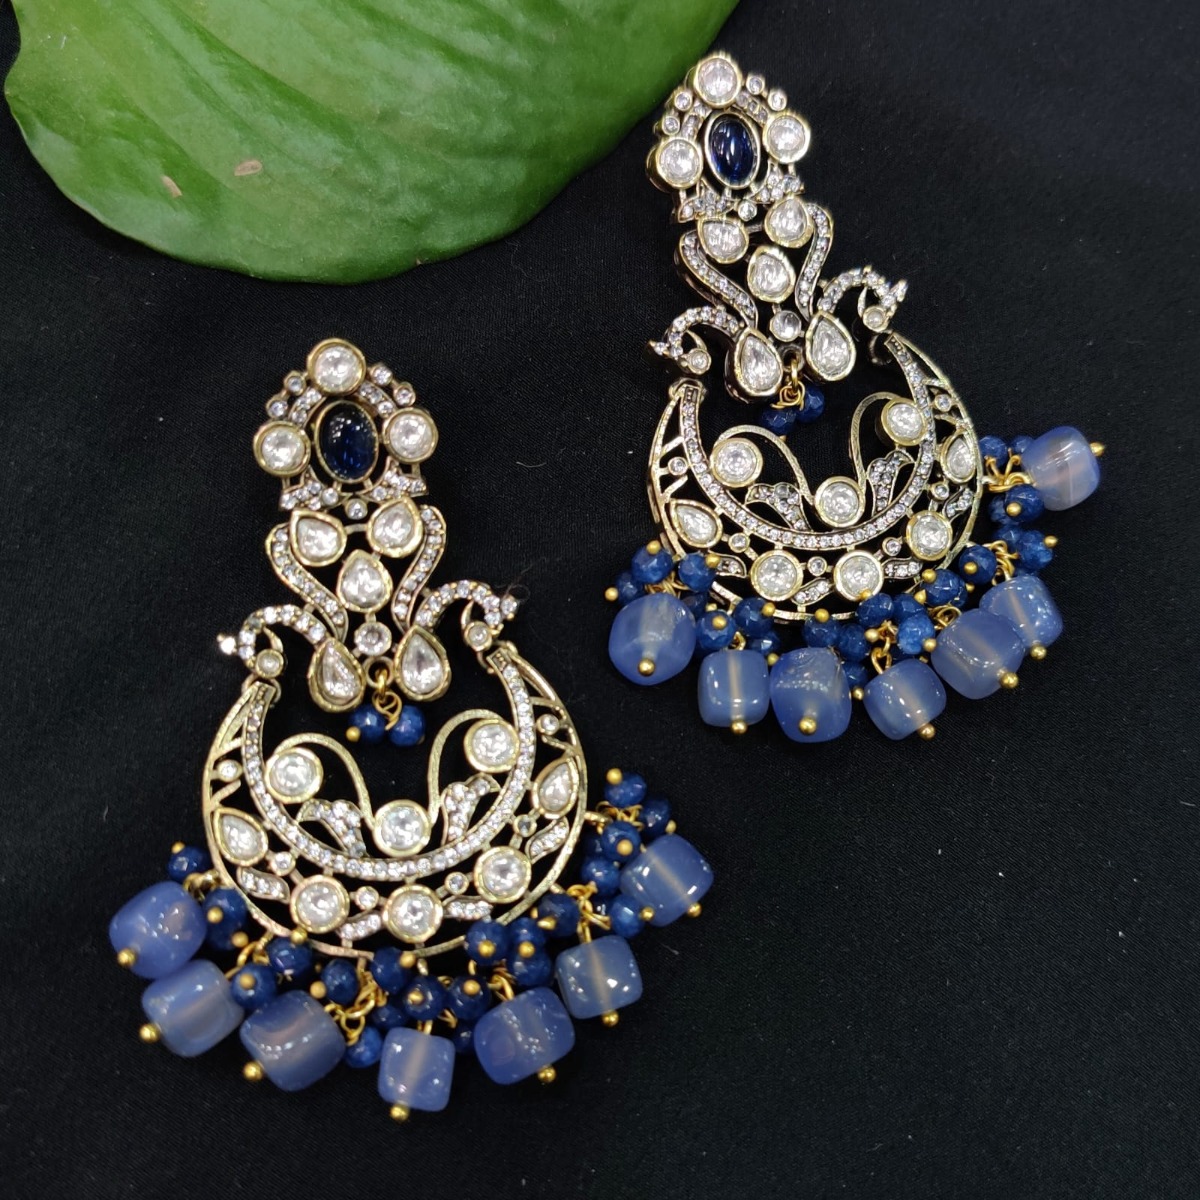 Details more than 72 earrings high quality super hot